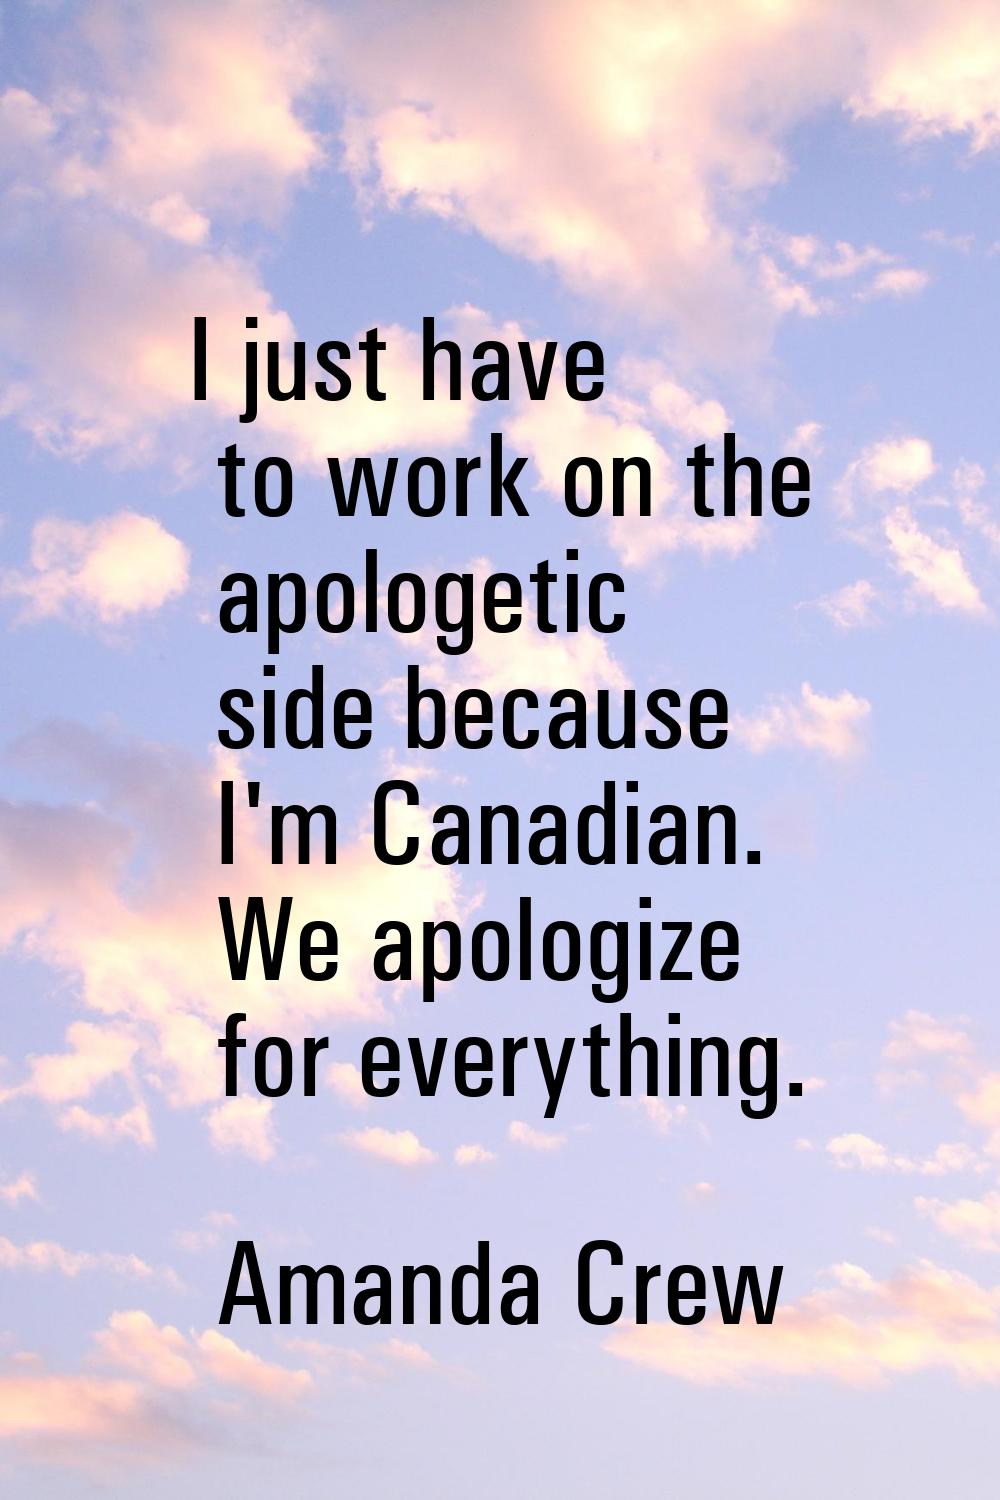 I just have to work on the apologetic side because I'm Canadian. We apologize for everything.